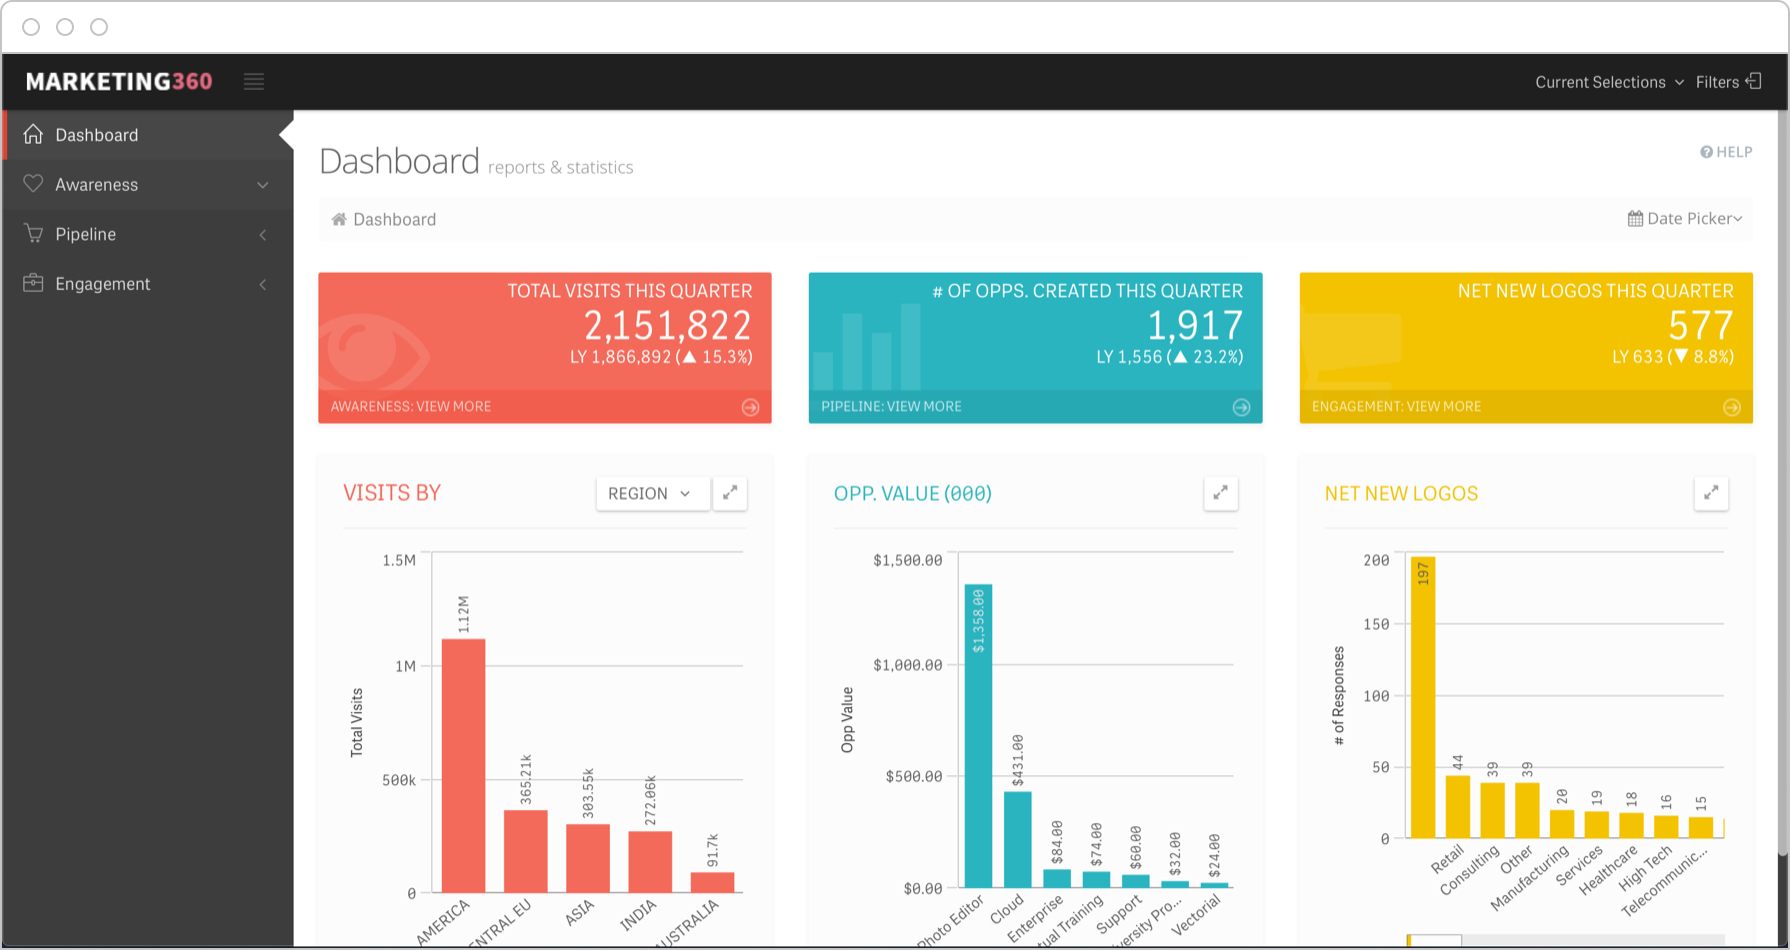 CMO Dashboards provide a real-time view of performance around KPIs across the entire marketing funnel.